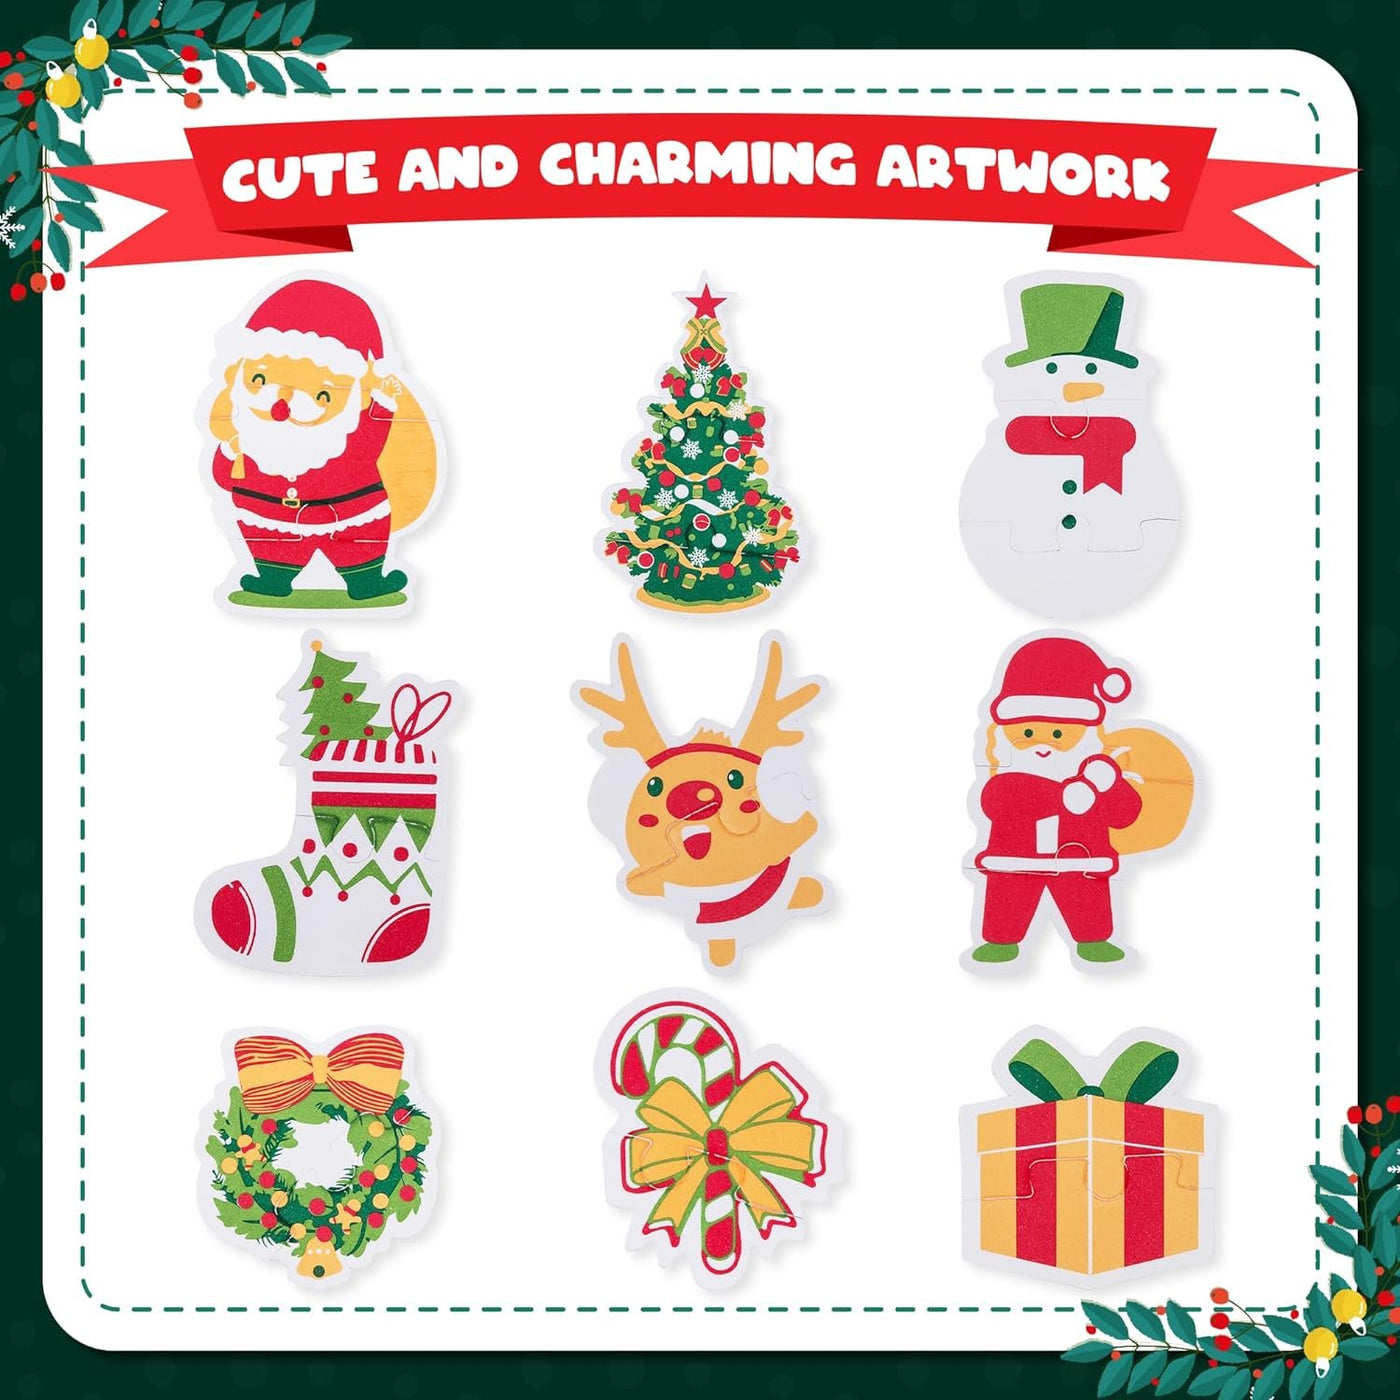 ArtCreativity Christmas Puzzle Toys for Babies - 9 Puzzles - EVA Christmas Baby Puzzle Toys for Infants That Float in Water - 9 Kids Christmas Puzzle Designs - Holiday Stocking Stuffers